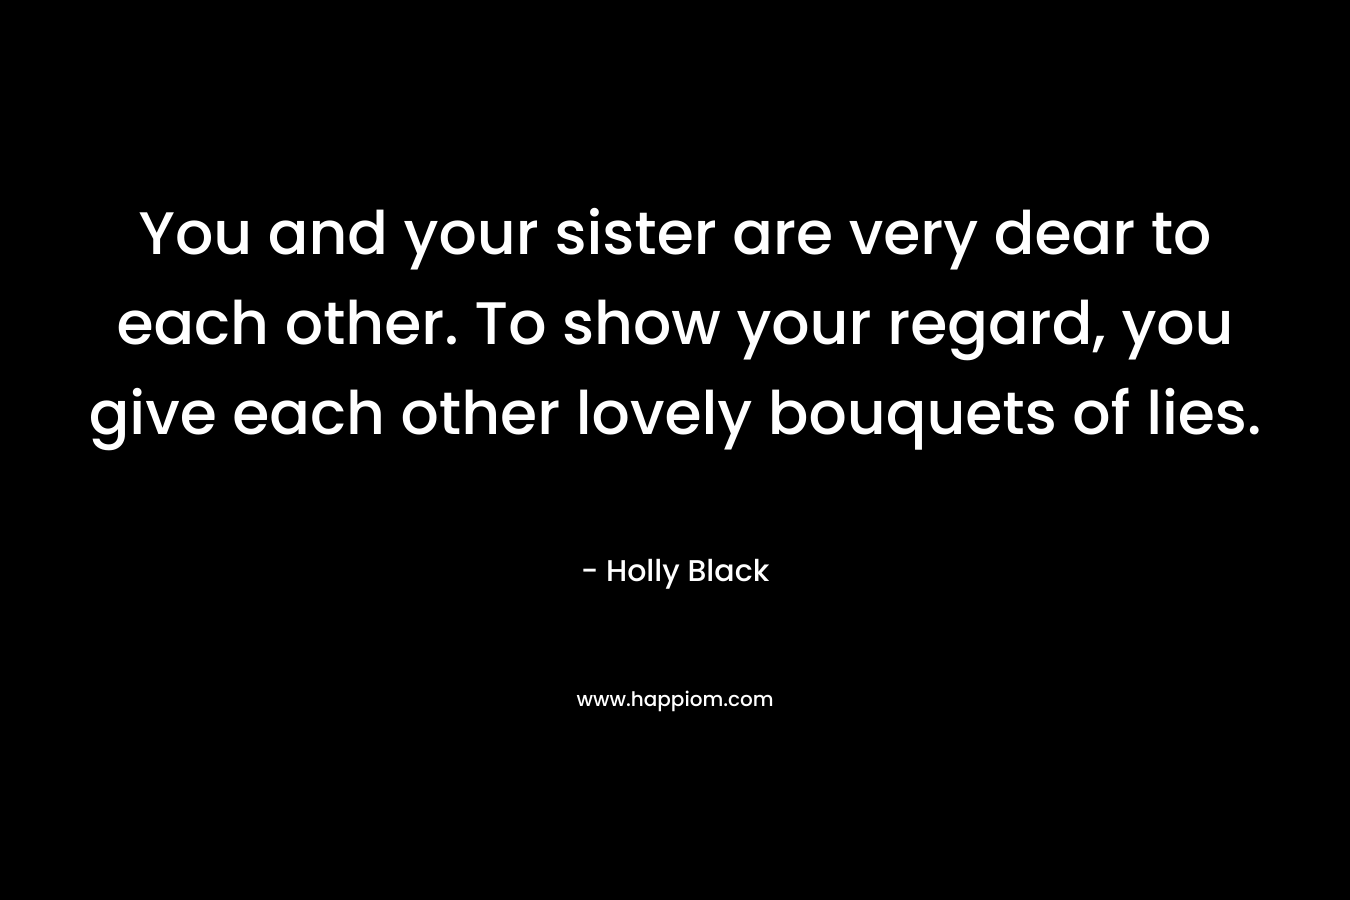 You and your sister are very dear to each other. To show your regard, you give each other lovely bouquets of lies.